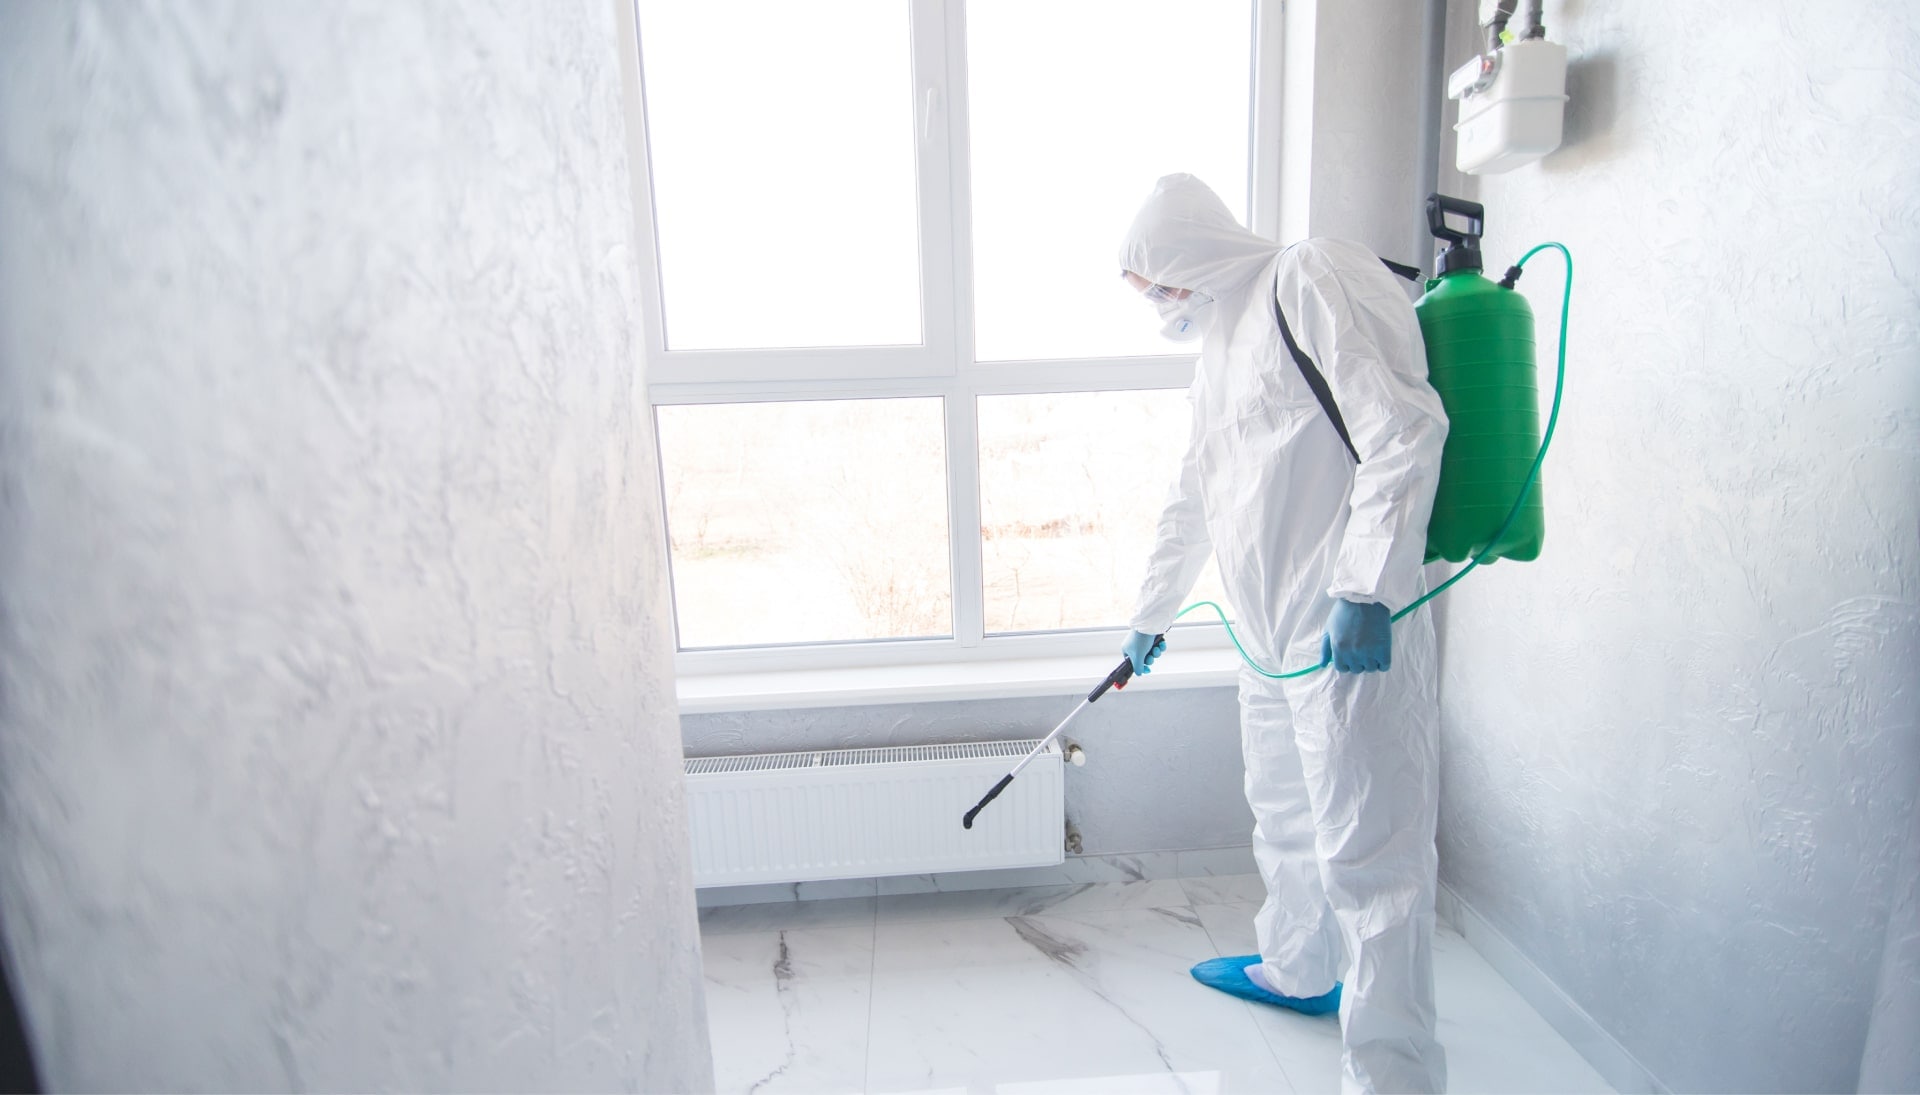 We provide the highest-quality mold inspection, testing, and removal services in the Wichita, Kansas area.